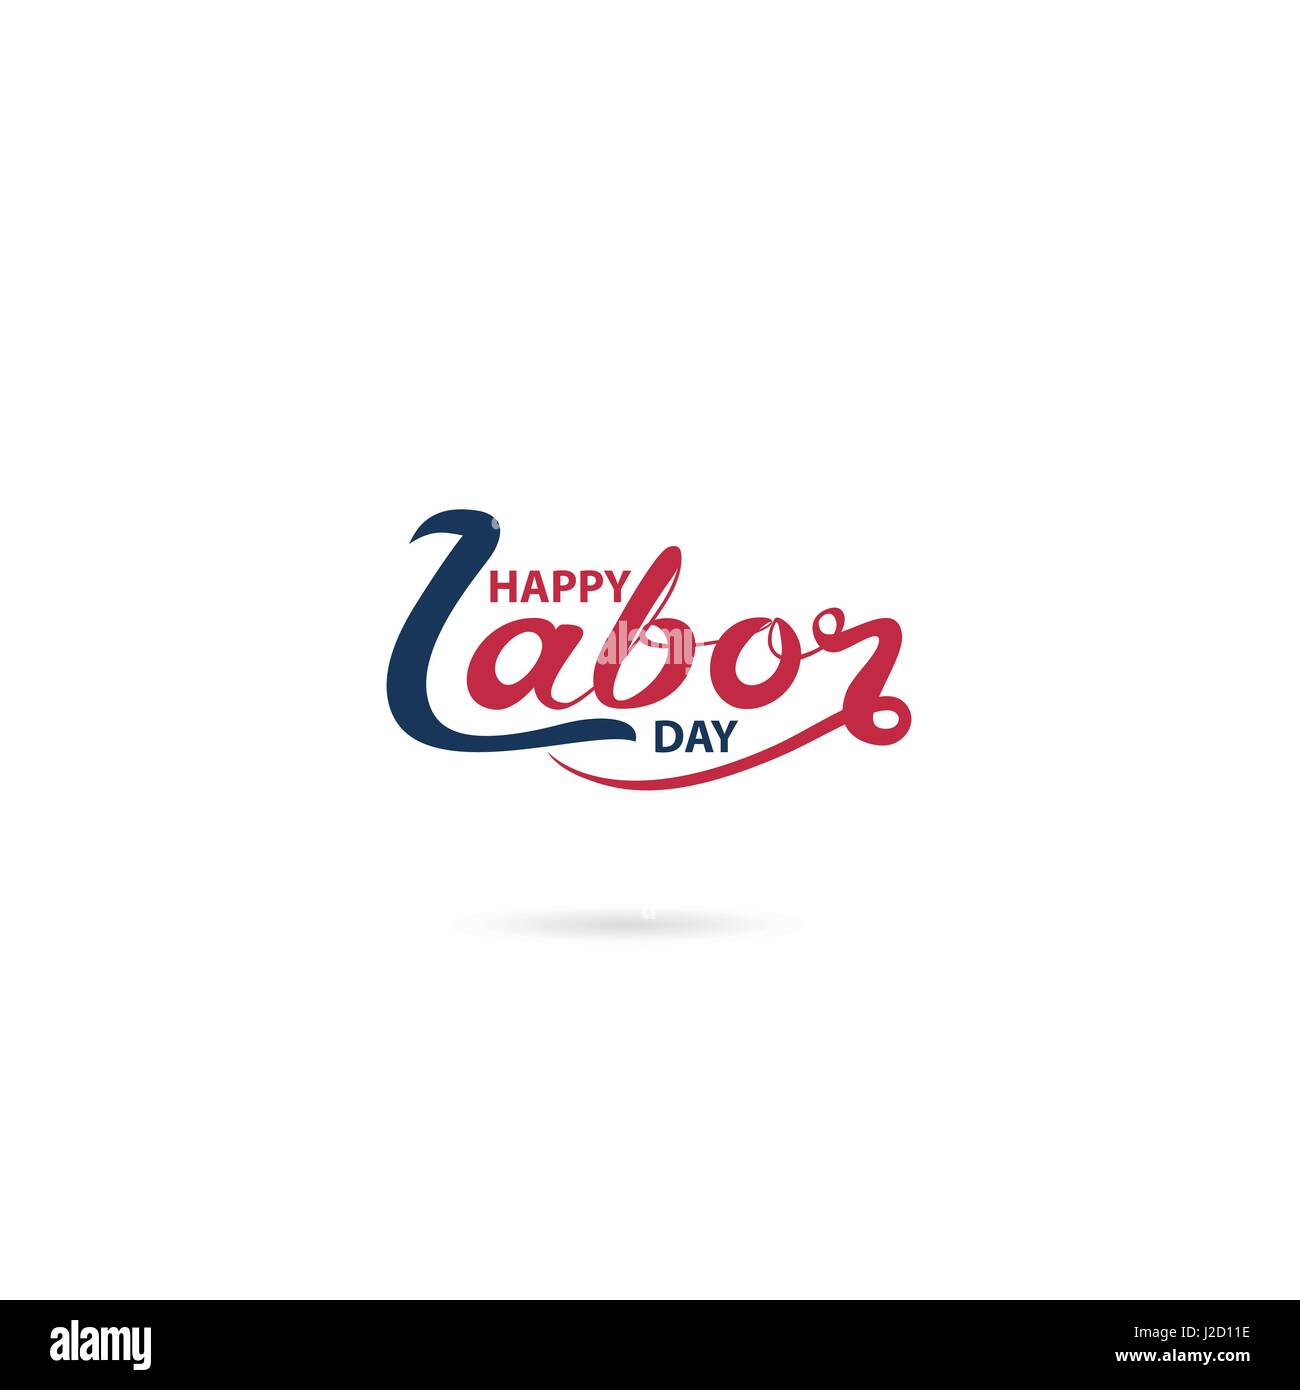 Happy Labor Day Calligraphy Background.Happy Labor Day Typographical Design Elements.Vector illustration Stock Vector